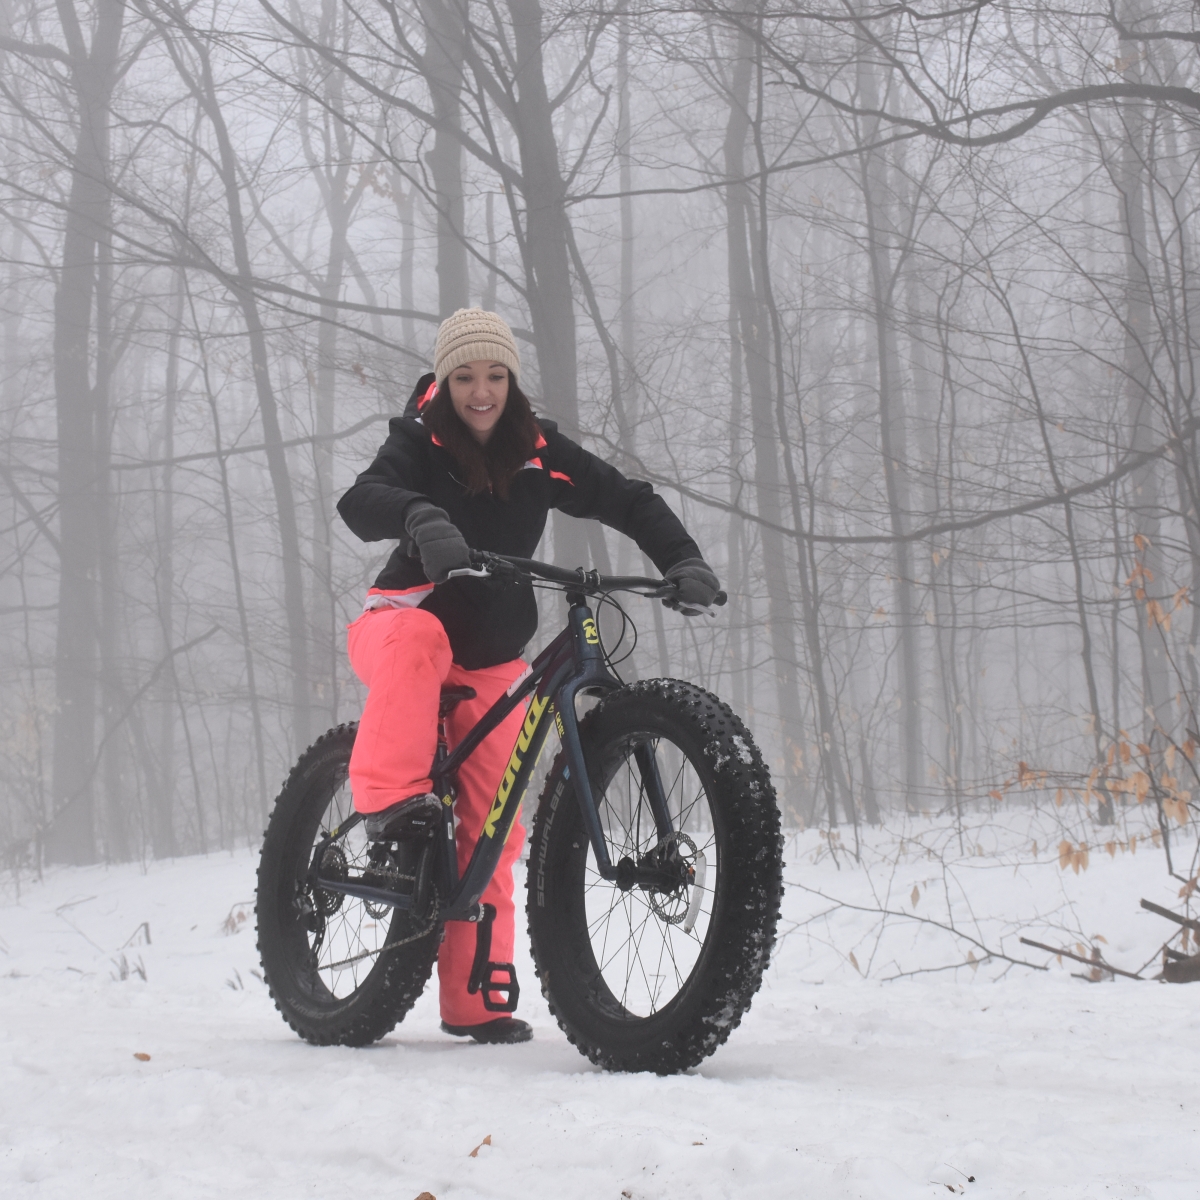 Danna on a fat bike in Winter at Allegany State Park